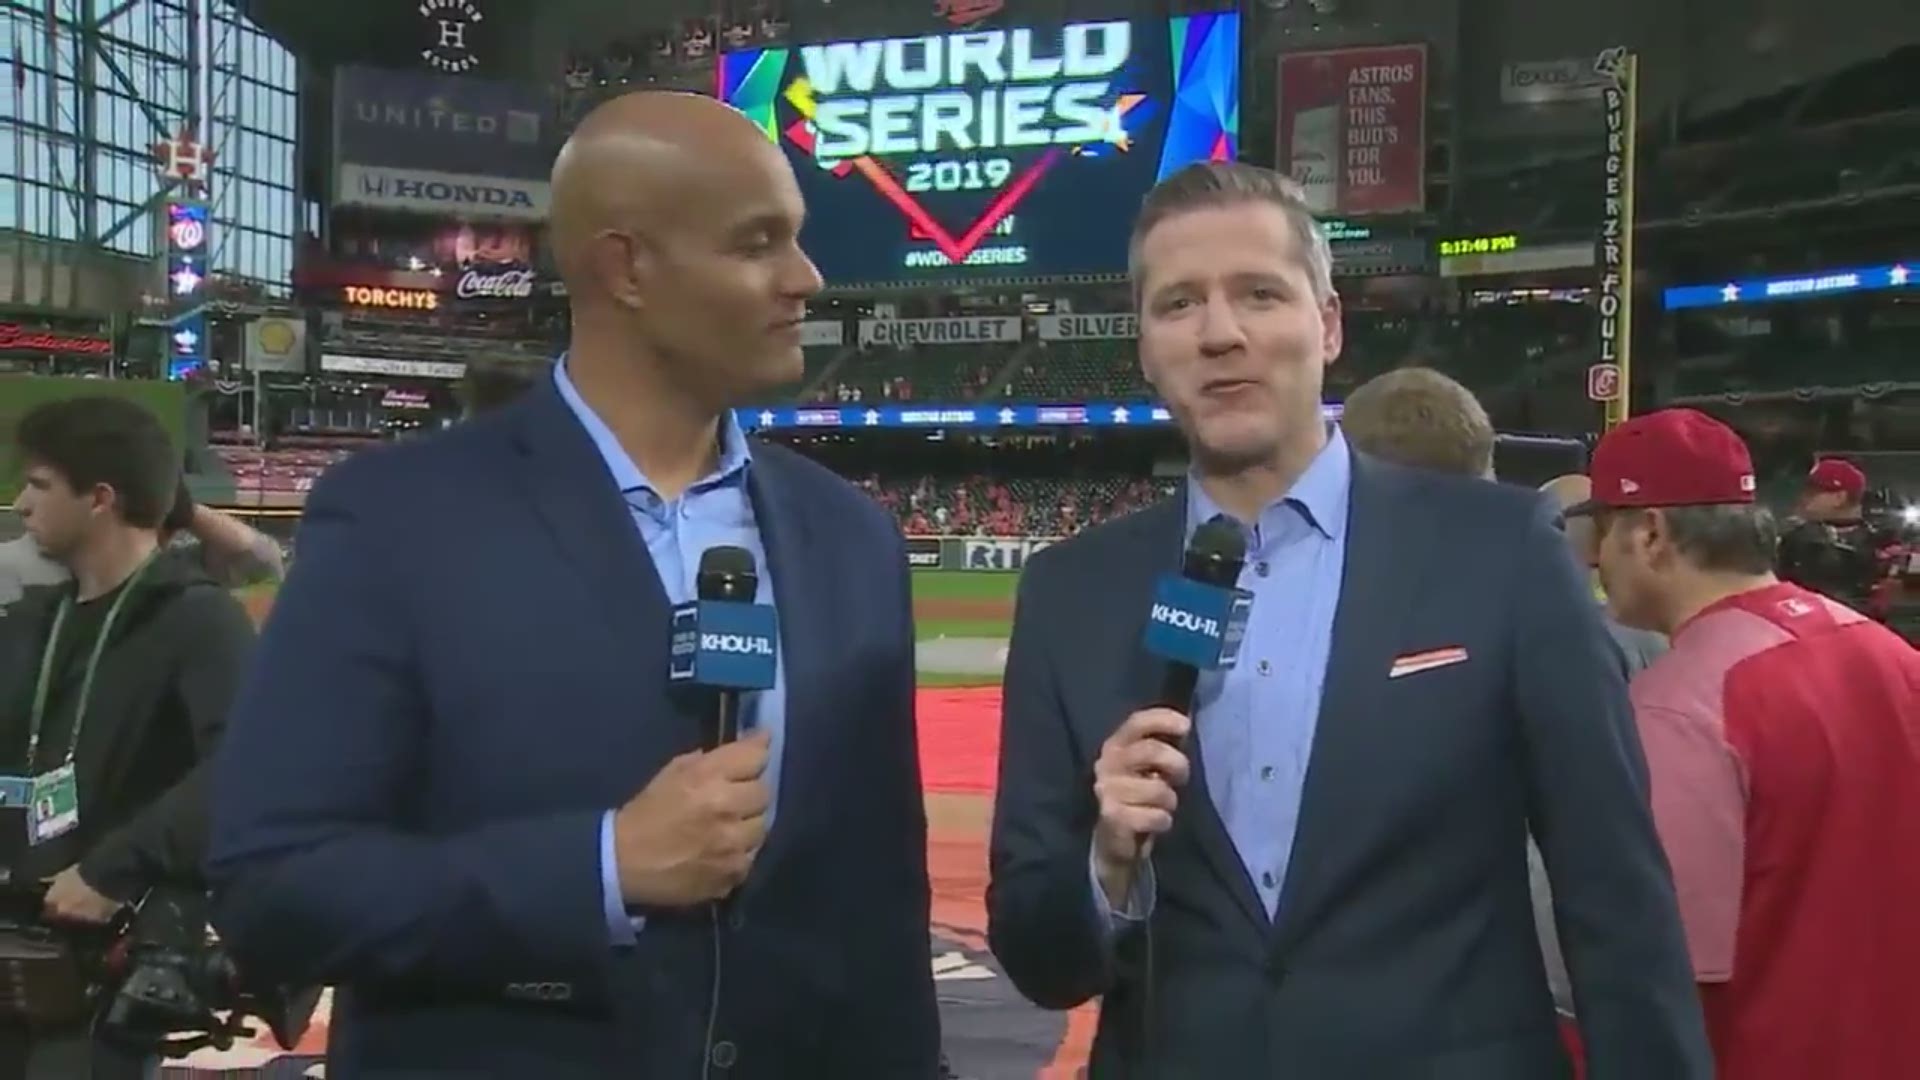 KHOU's Jason Bristol and Jeremy Booth share the three things the Astros must do tonight to beat the Washington Nationals and win the World Series.